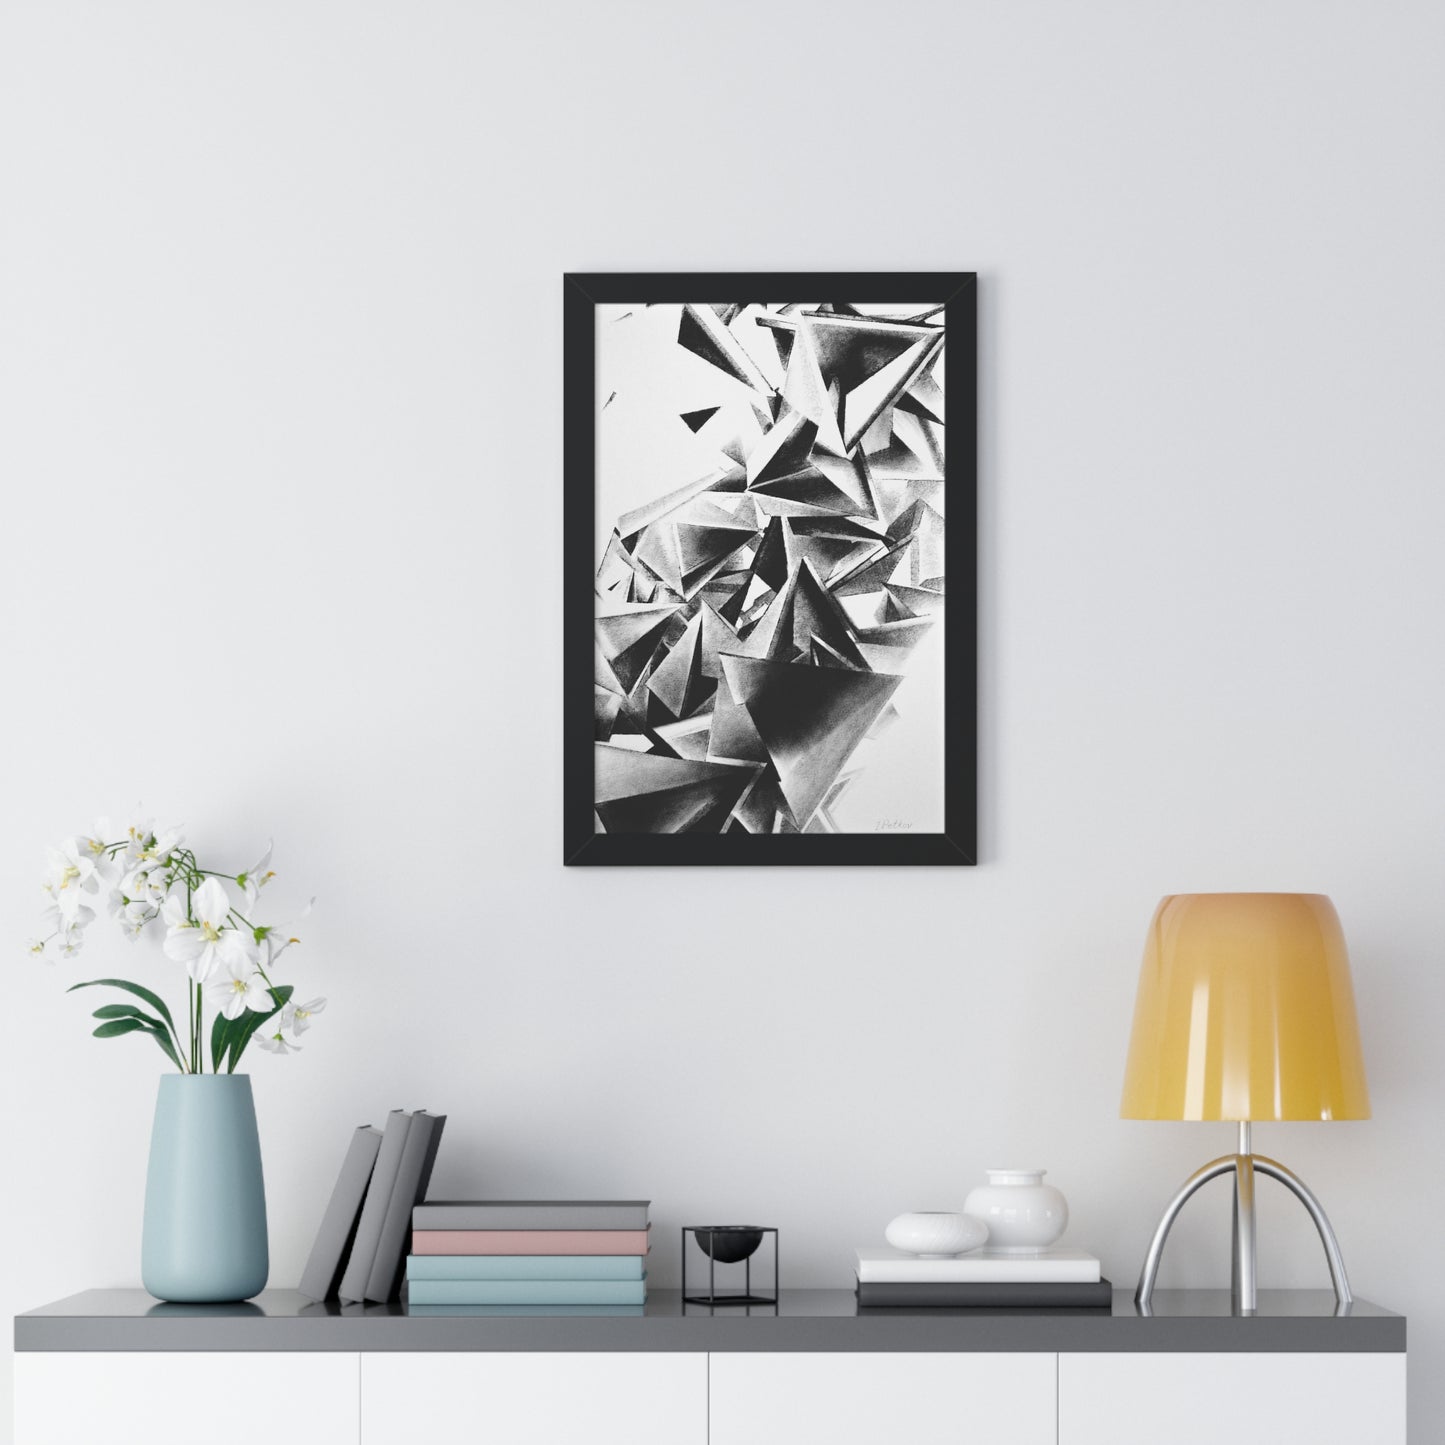 Whirlstructure III - Framed Vertical Poster